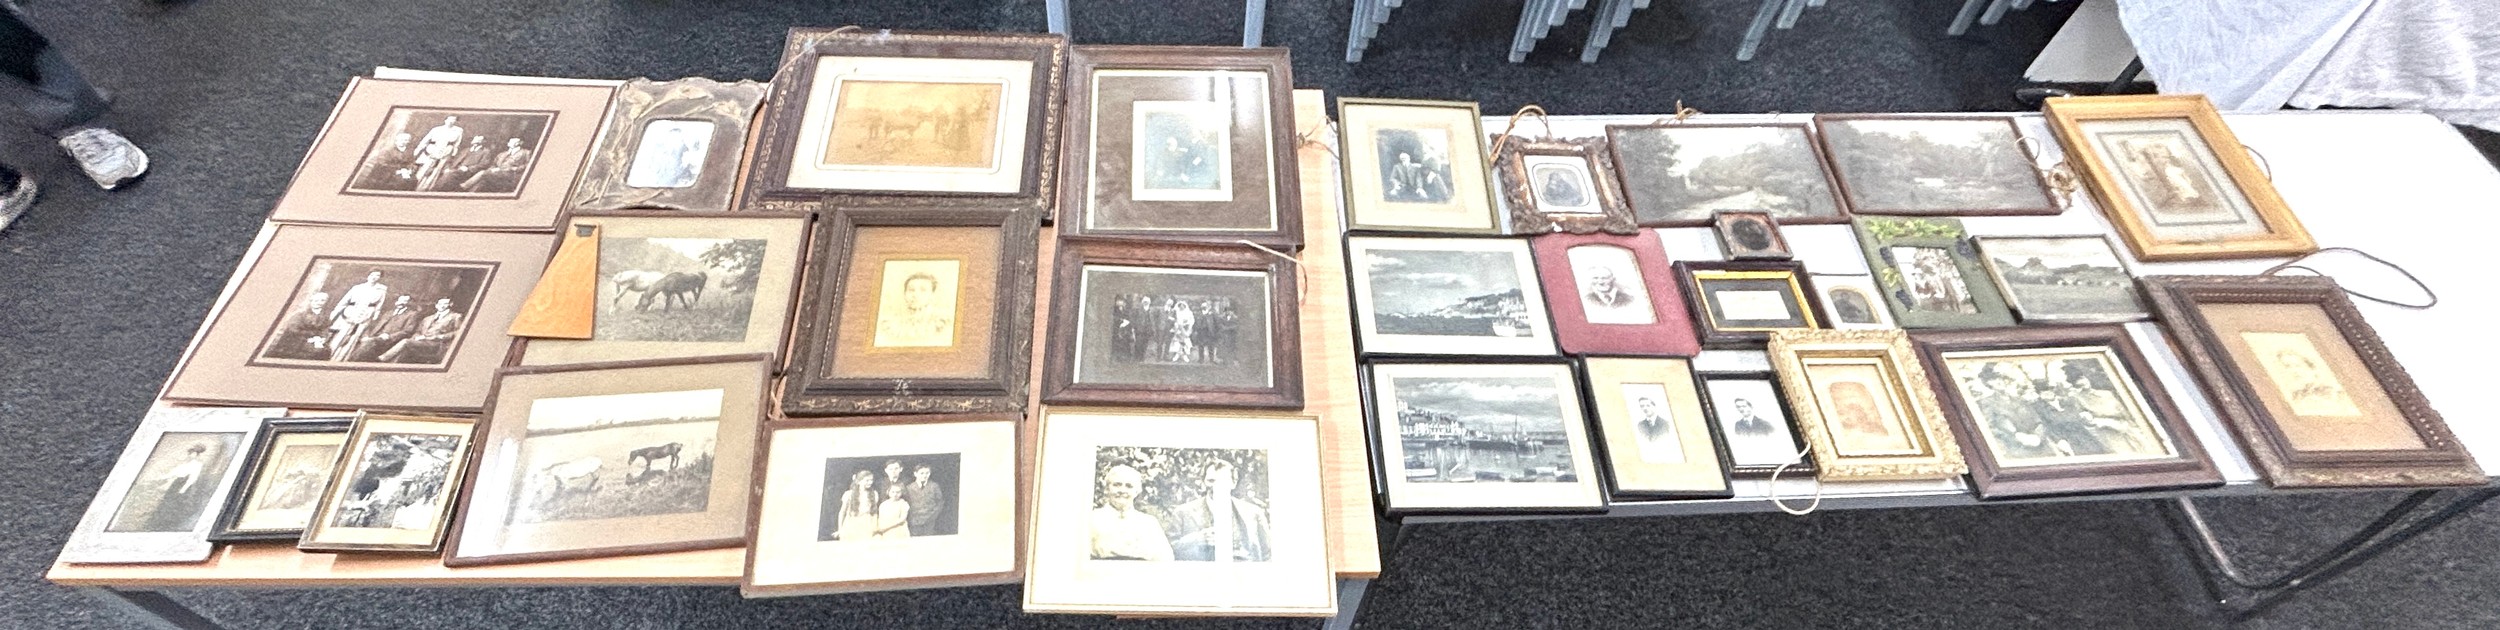 Large selection of framed antique photos largest measures approximately 16 inches by 16 inches